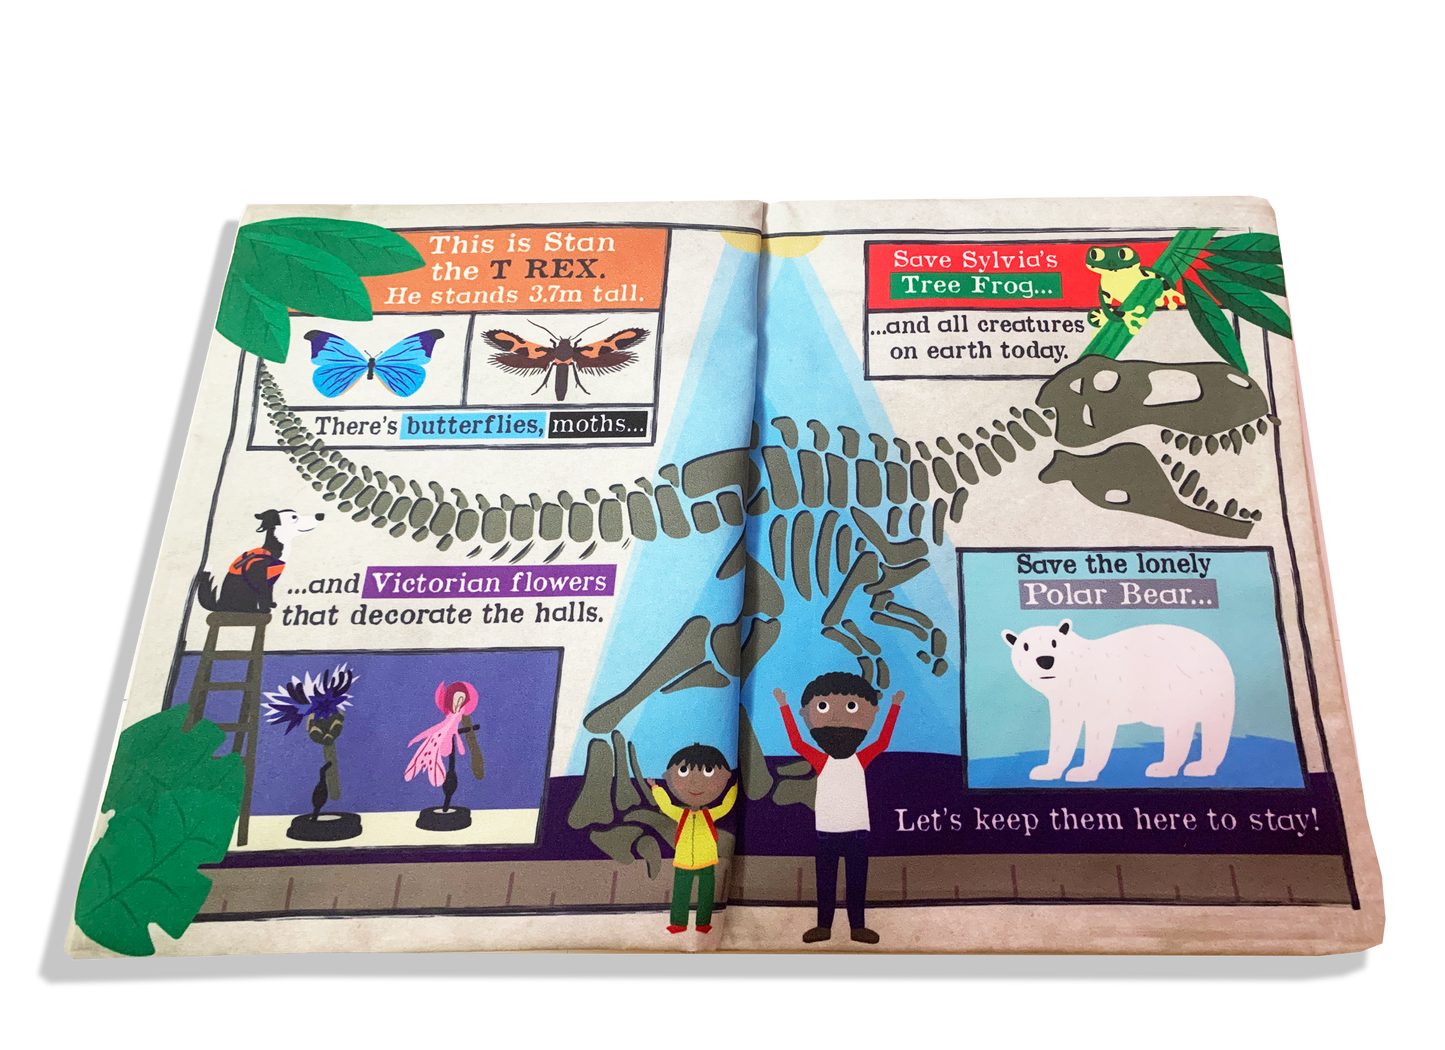 The cloth book open to a set of pages with Stan the trex on.